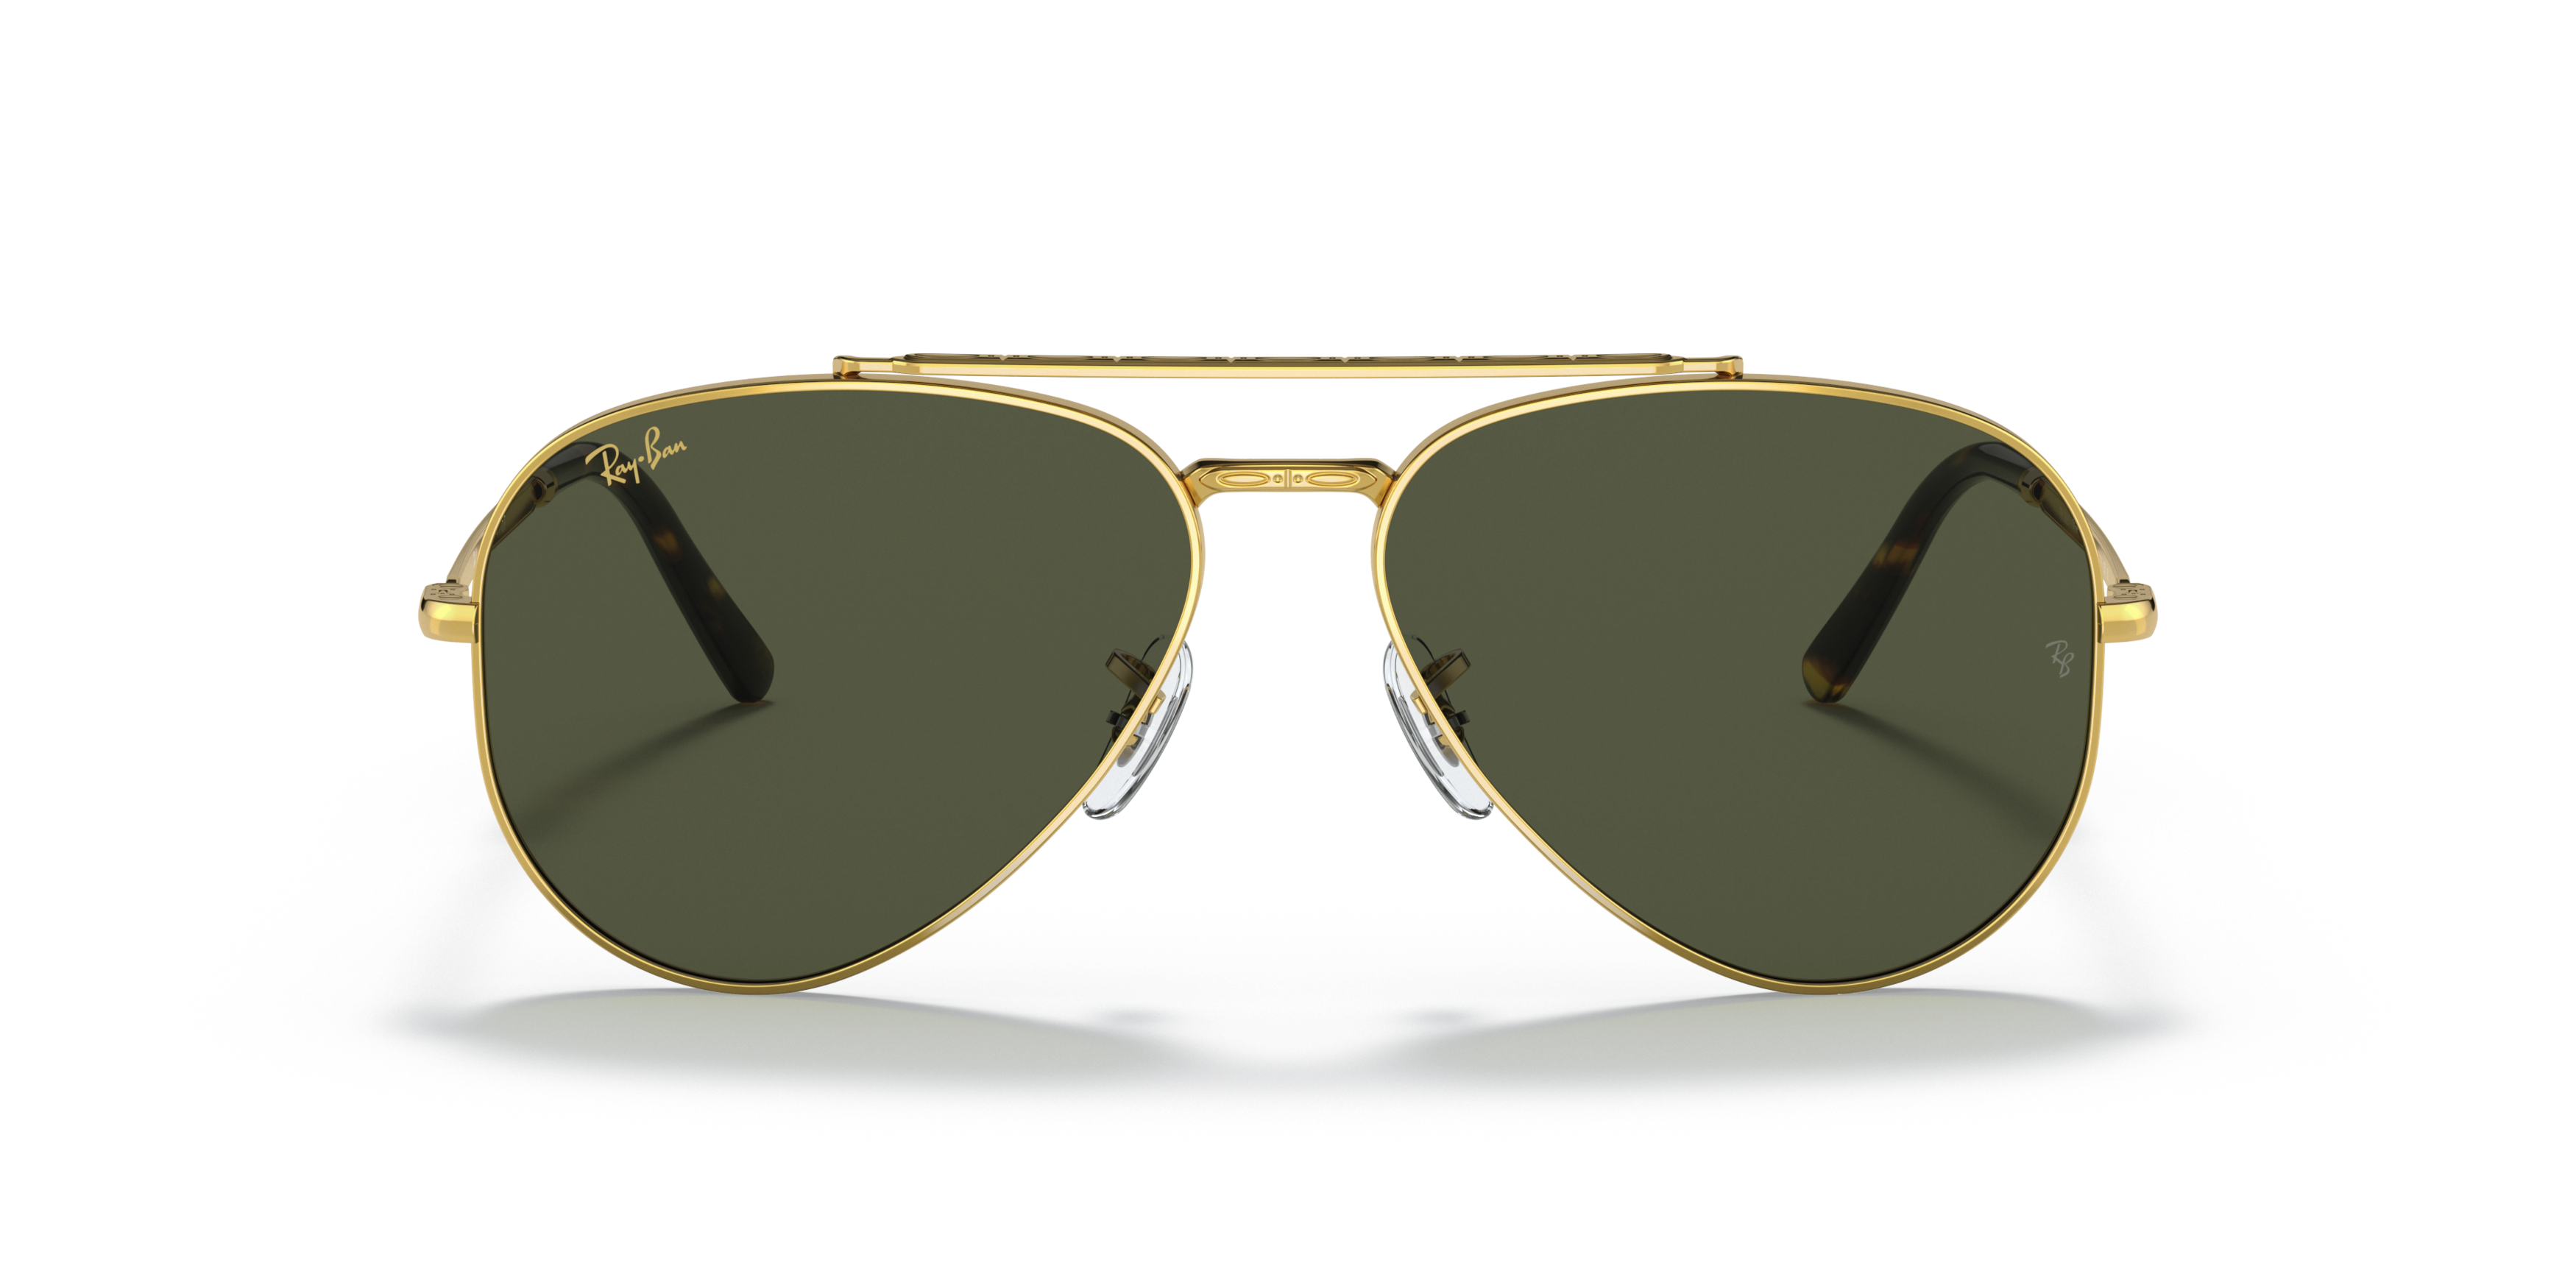 [products.image.front] Ray-Ban RB3625 919631